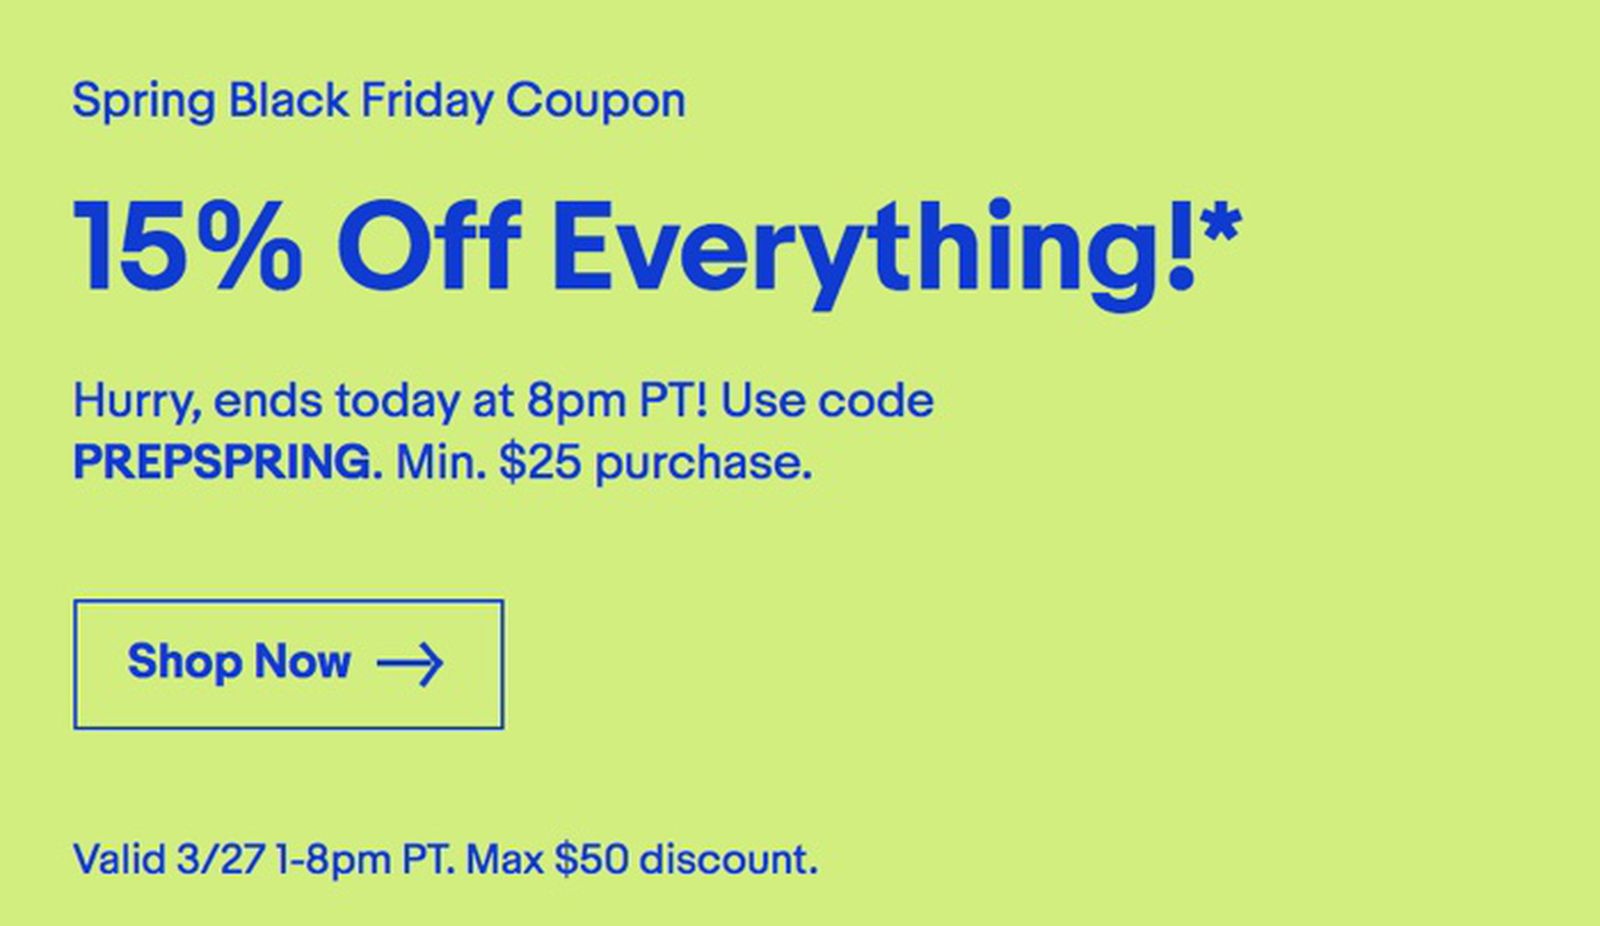 eBay Shares Another Spring Savings Coupon With 15 Off Almost